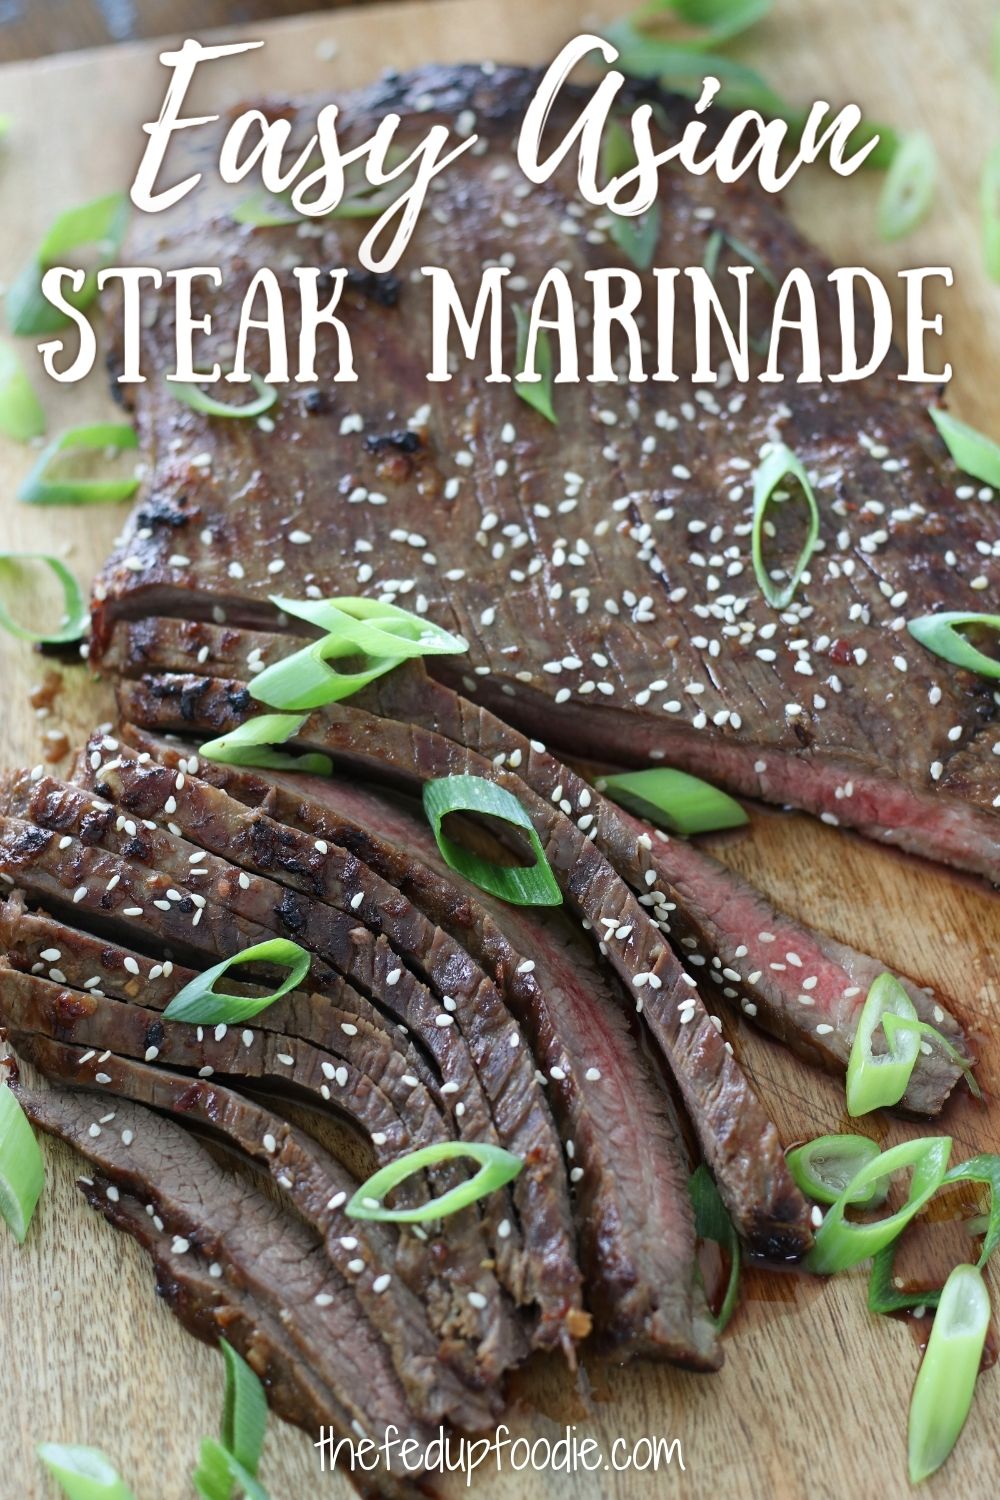 Asian Steak Marinade recipe creates tender, juicy and flavorful steak that pairs exceptionally well with other Asian cuisine. This recipe is very quick and easy to make. The best part, it produces steak that very much rivals dining out. #AsianRecipes #AsianSteakRecipes #AsianSteakMarinade #EasyAsianSteakMarinade #BestAsianSteakMarinade #QuickAsianSteakMarinade